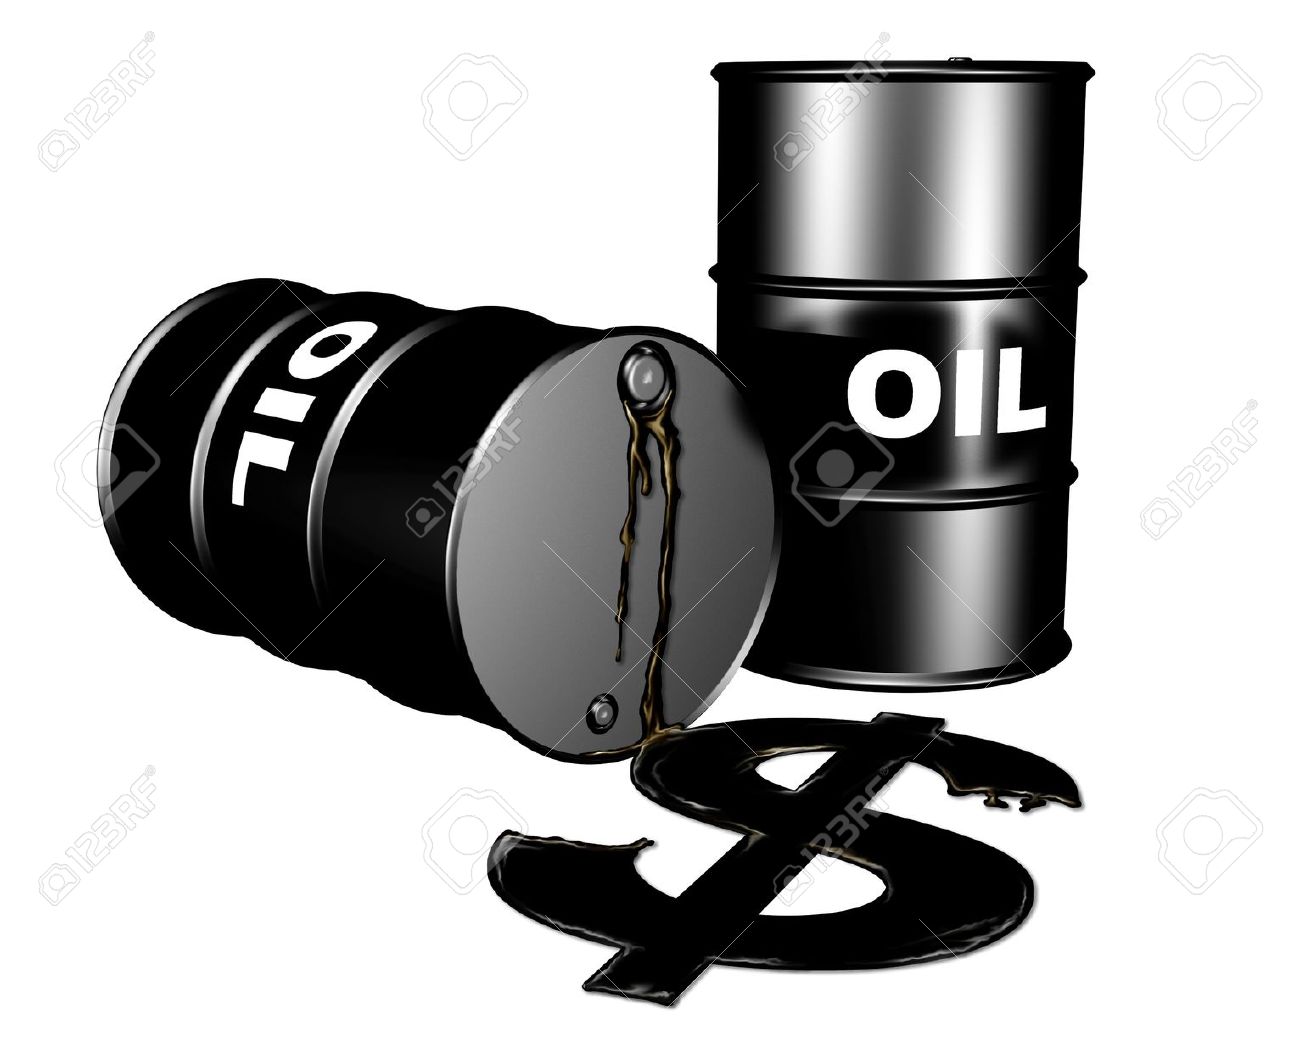 3087941-Oil-drums-and-a-dollar-symbol-of-leaking-oil-representing-the-burden-on-the-dollar-by-the-oil-market-Stock-Photo